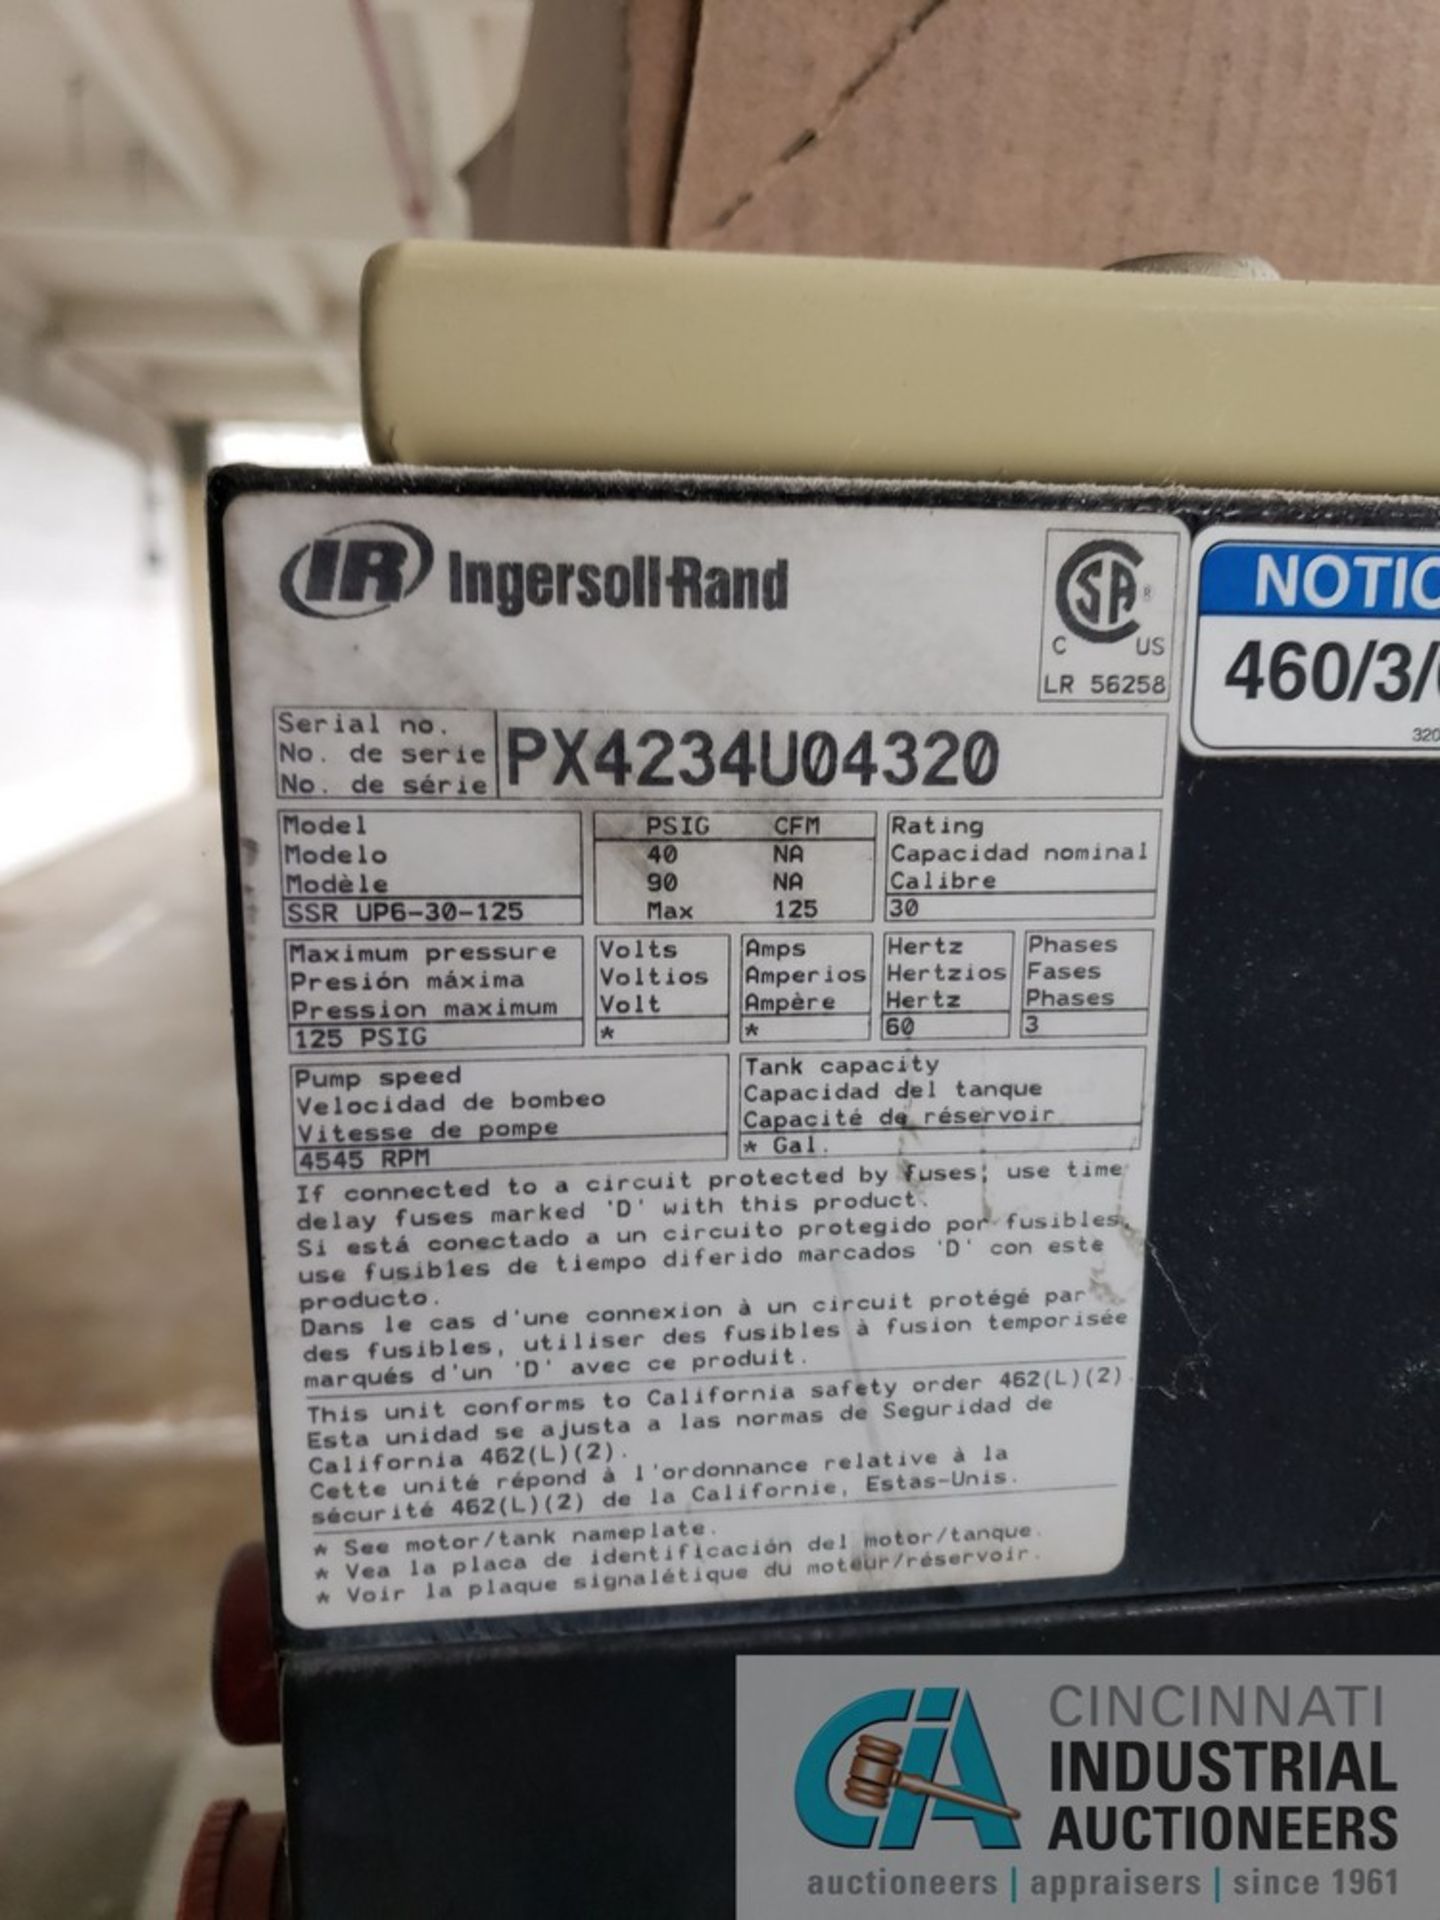 30-HP INGERSOLL RAND UP6-30-125 AIR COMPRESSOR; S/N PA42300432D, 265 HOURS SHOWING ON ANALOG METER - Image 4 of 4